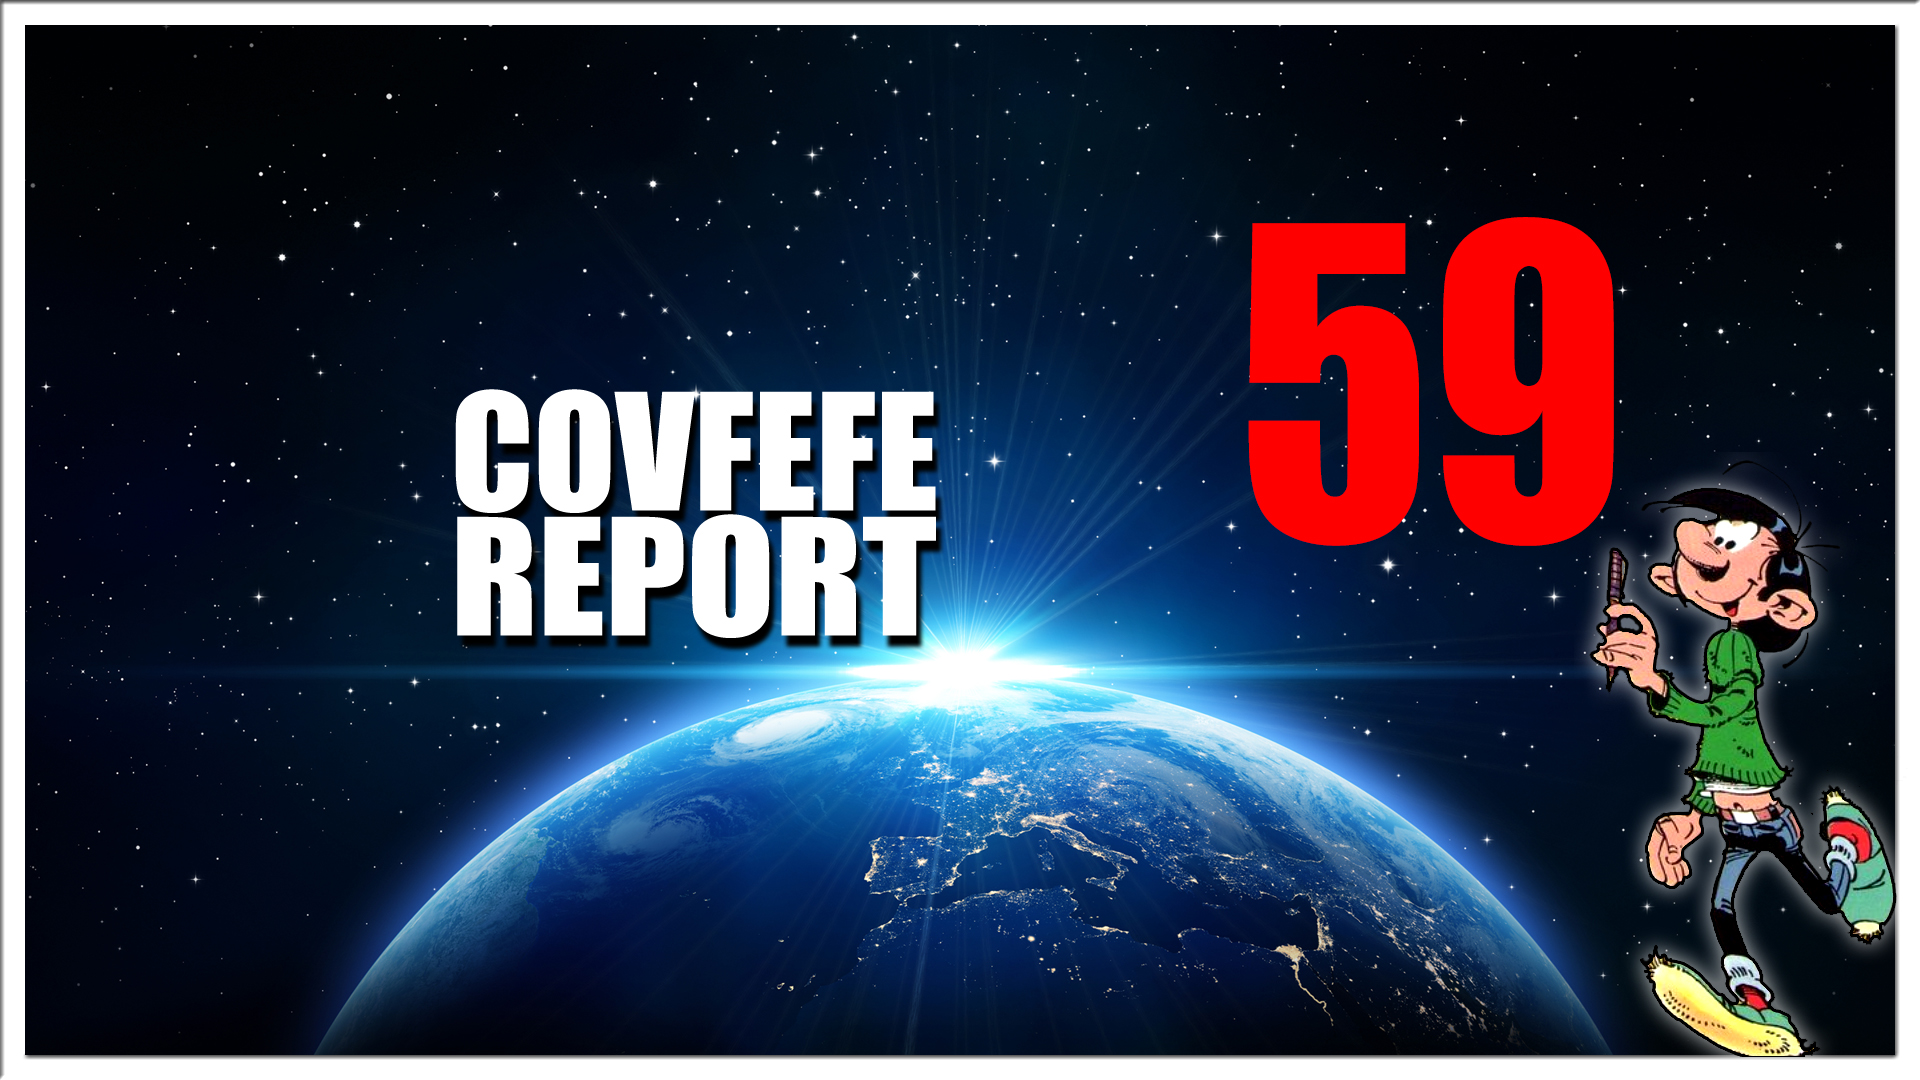 Covfefe Report 59. We the people are the cure, Jules Deelder